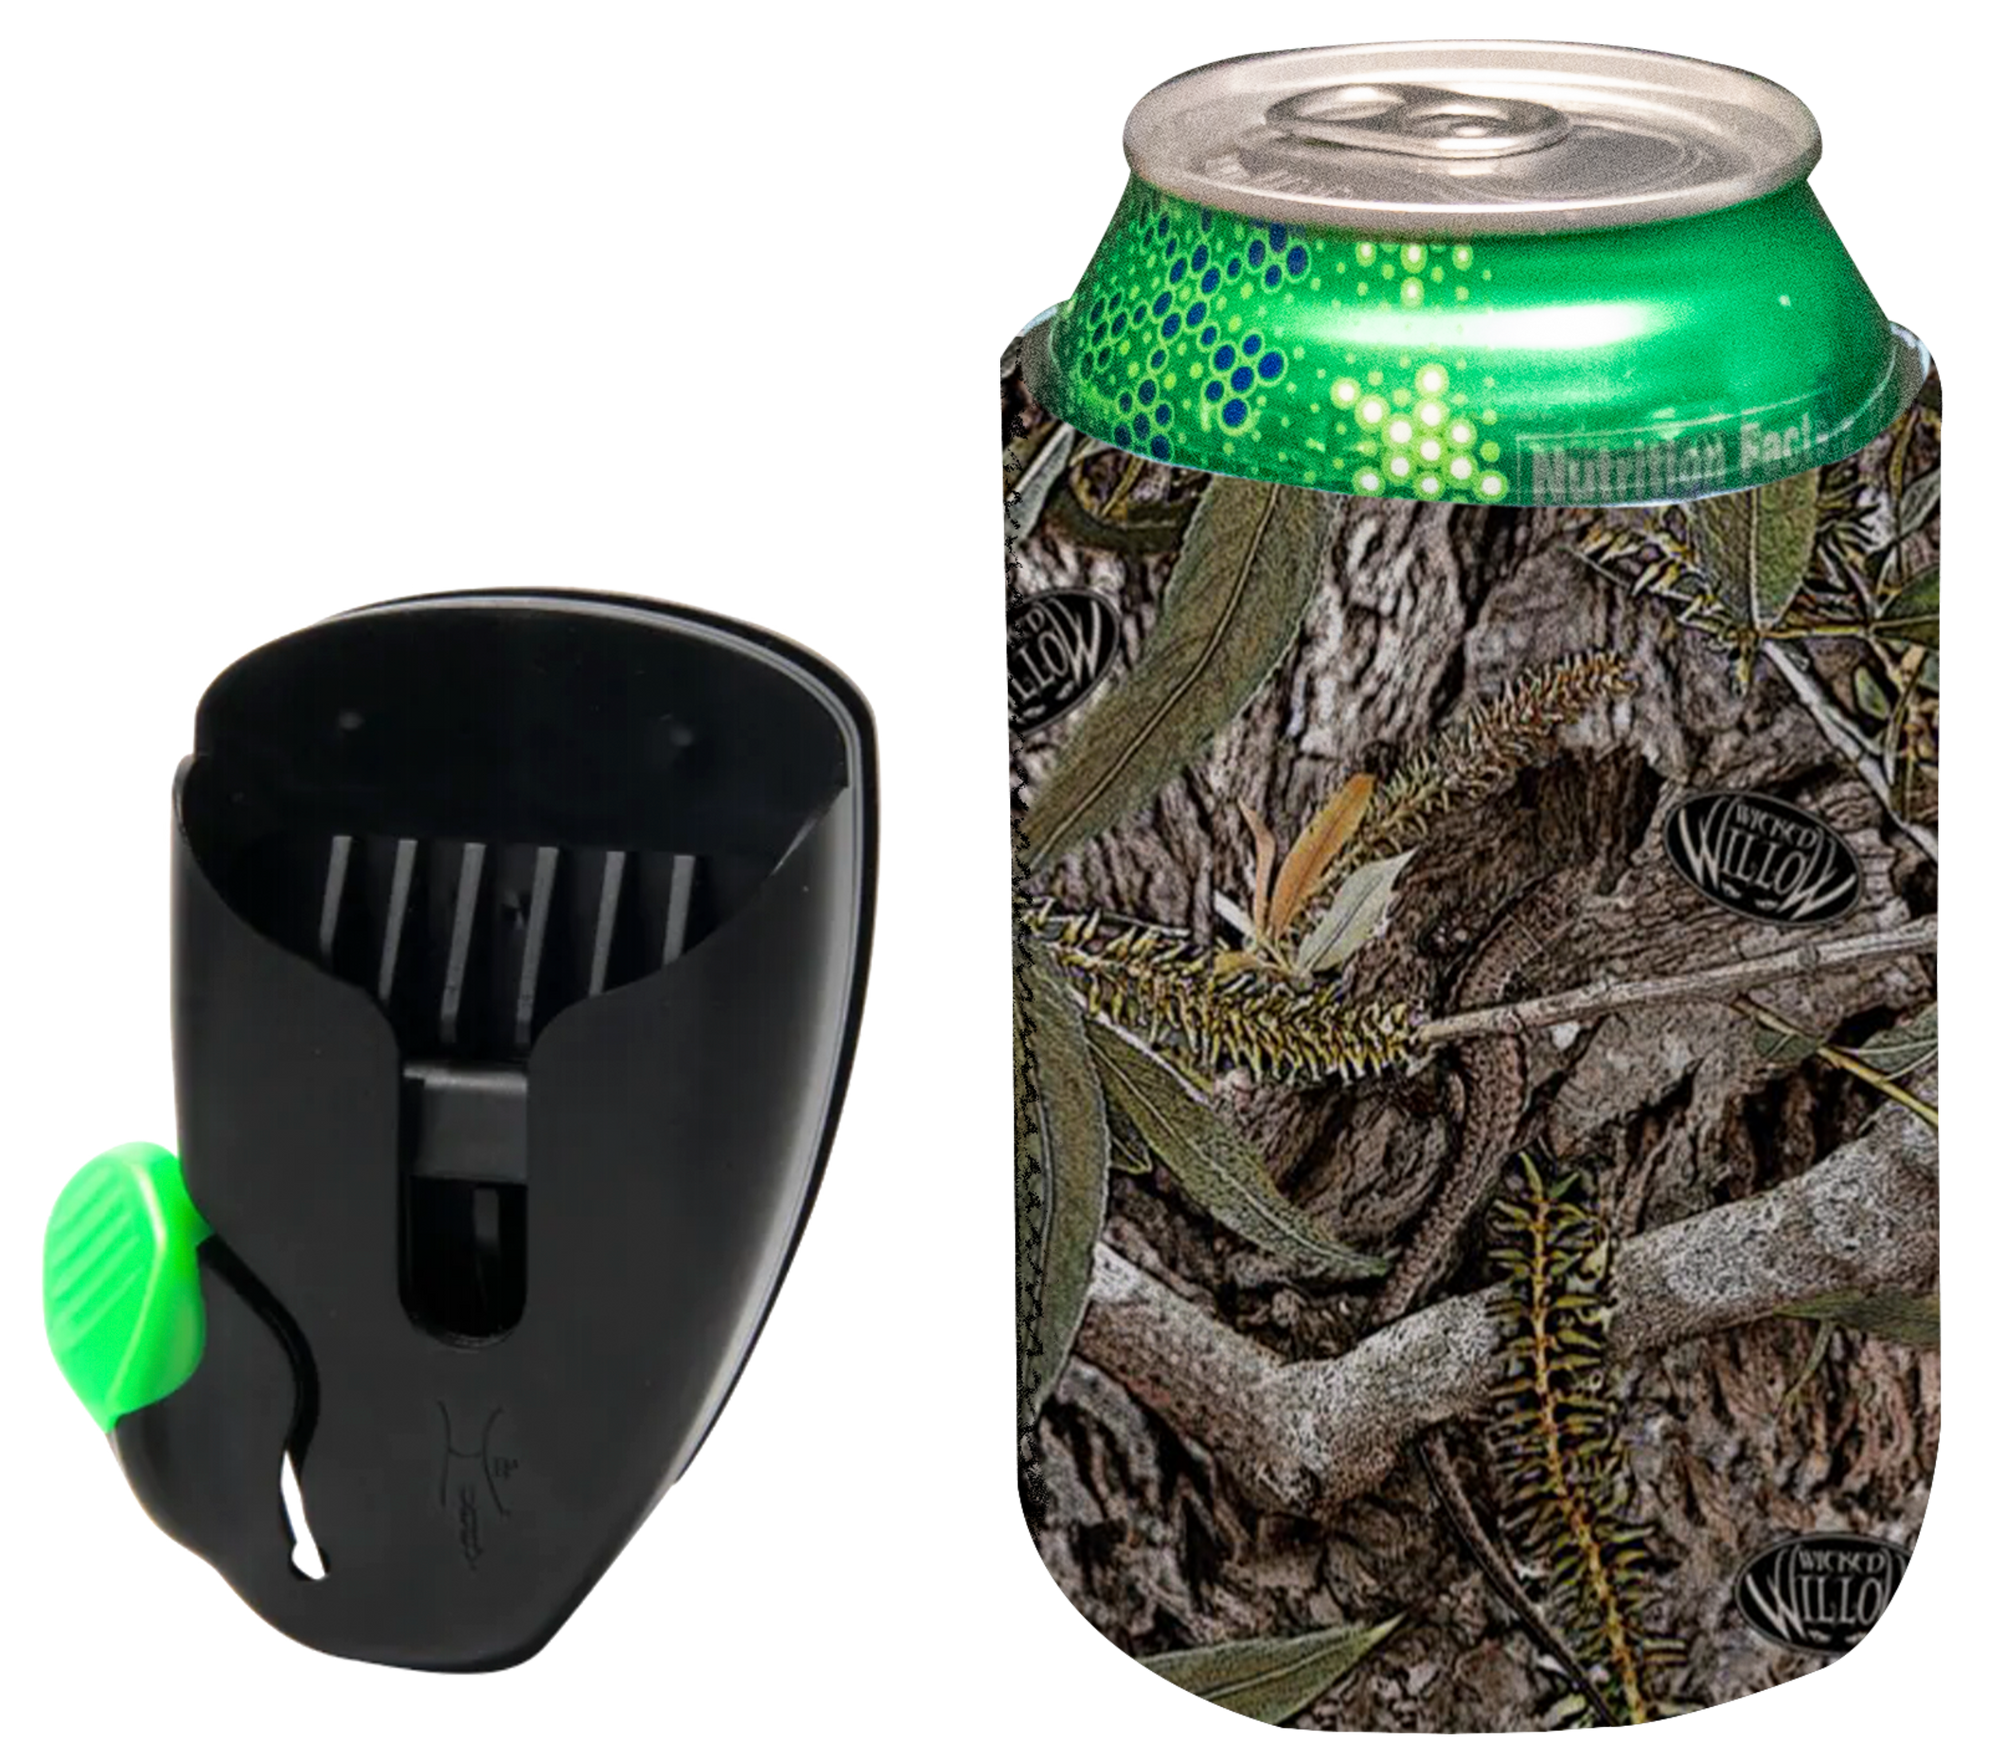 Small Hands-Free Beer & Drink Holder/Carrier (Best Fits 12oz. Cans)